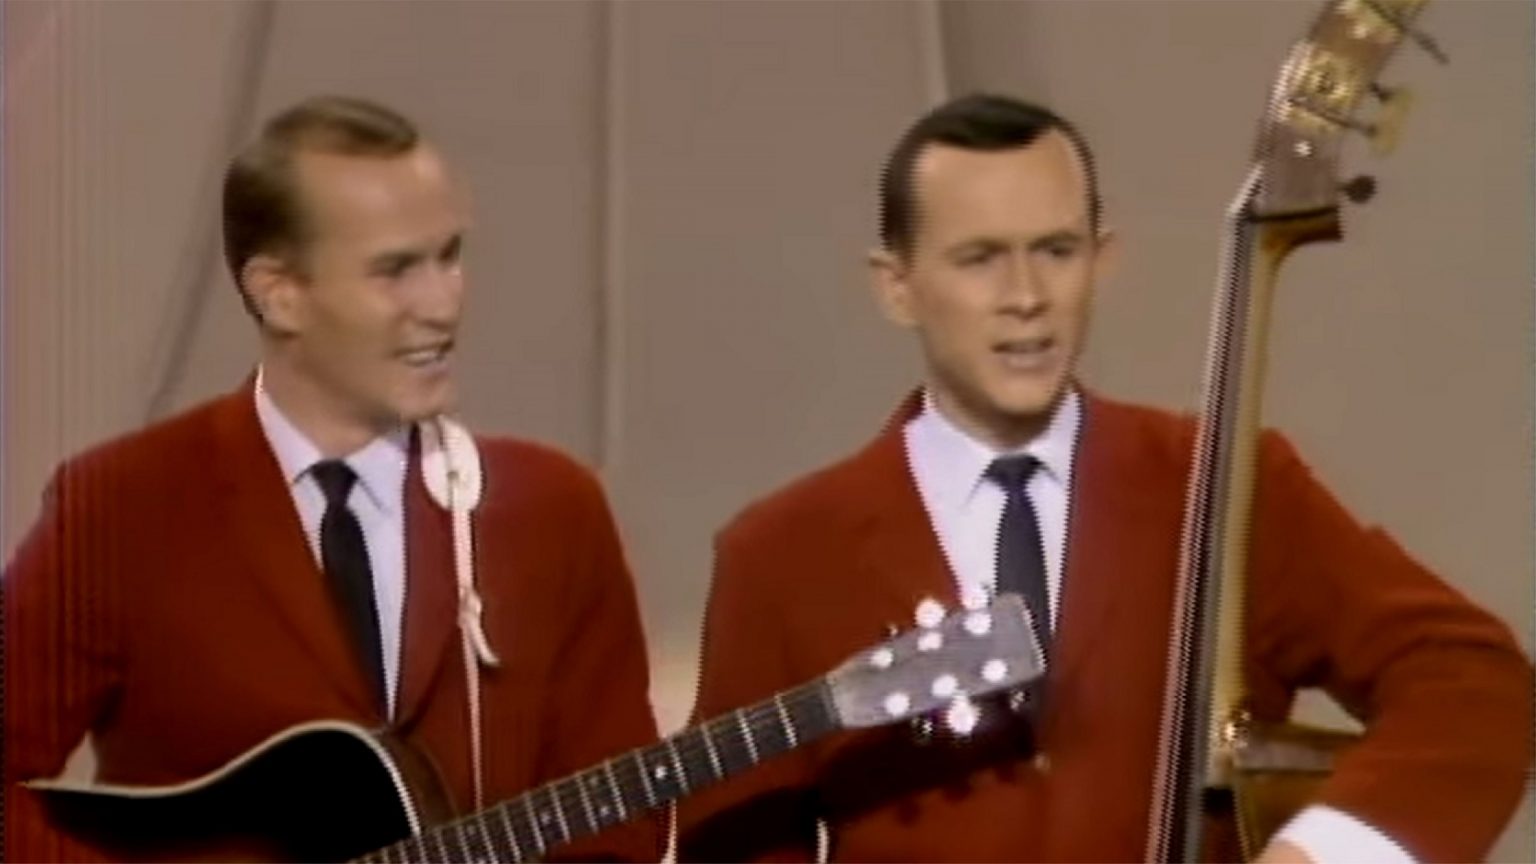 Are the Smothers Brothers Still Alive? Let’s have a look